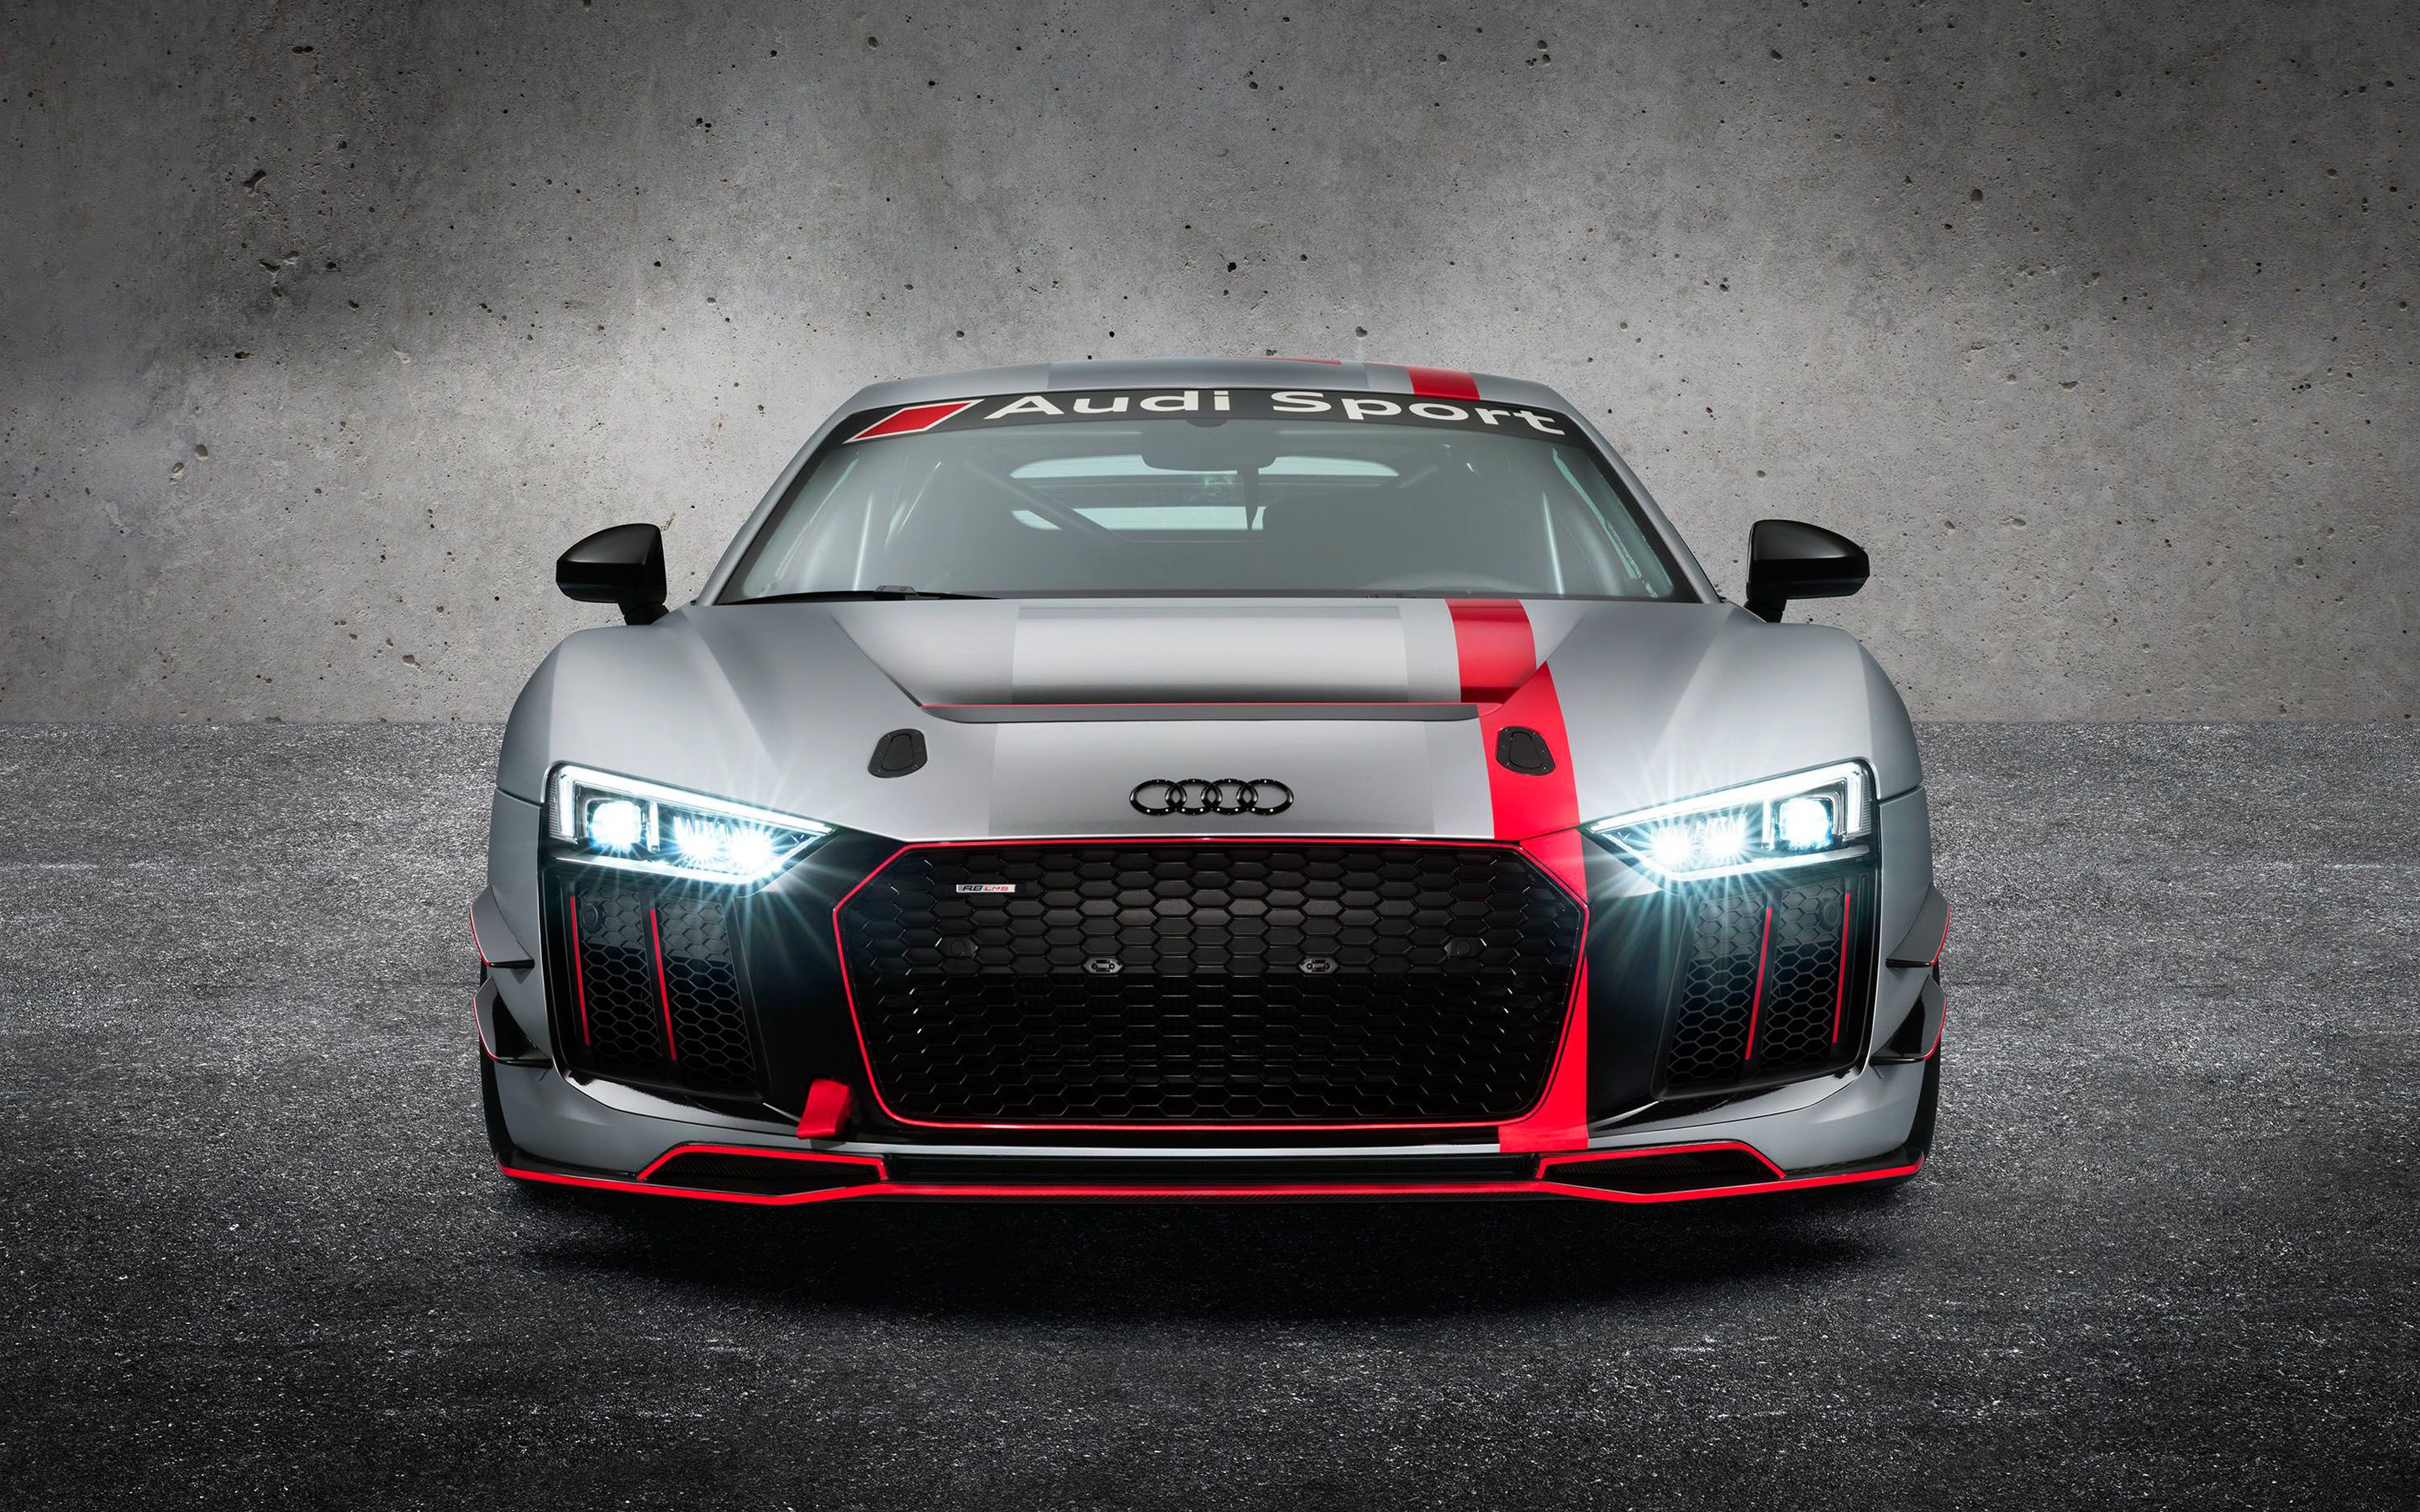 Audi R8 Wallpaper HD Photo, Wallpaper and other Image